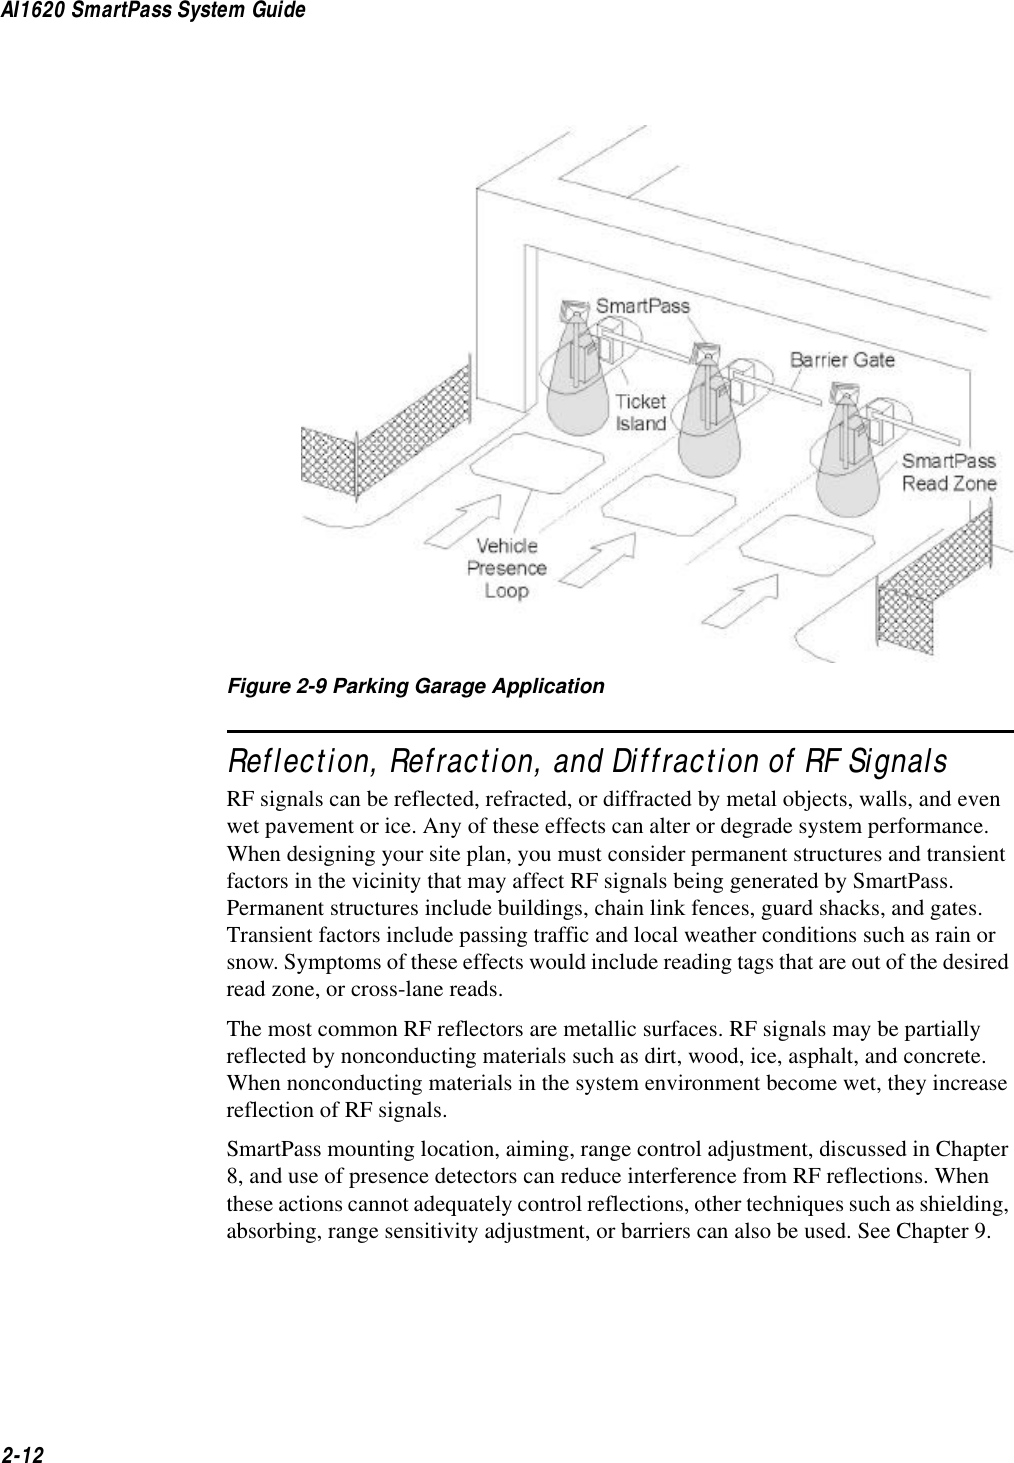 AI1620 SmartPass System Guide2-12Figure 2-9 Parking Garage ApplicationReflection, Refraction, and Diffraction of RF SignalsRF signals can be reflected, refracted, or diffracted by metal objects, walls, and even wet pavement or ice. Any of these effects can alter or degrade system performance. When designing your site plan, you must consider permanent structures and transient factors in the vicinity that may affect RF signals being generated by SmartPass. Permanent structures include buildings, chain link fences, guard shacks, and gates. Transient factors include passing traffic and local weather conditions such as rain or snow. Symptoms of these effects would include reading tags that are out of the desired read zone, or cross-lane reads.The most common RF reflectors are metallic surfaces. RF signals may be partially reflected by nonconducting materials such as dirt, wood, ice, asphalt, and concrete. When nonconducting materials in the system environment become wet, they increase reflection of RF signals.SmartPass mounting location, aiming, range control adjustment, discussed in Chapter 8, and use of presence detectors can reduce interference from RF reflections. When these actions cannot adequately control reflections, other techniques such as shielding, absorbing, range sensitivity adjustment, or barriers can also be used. See Chapter 9.